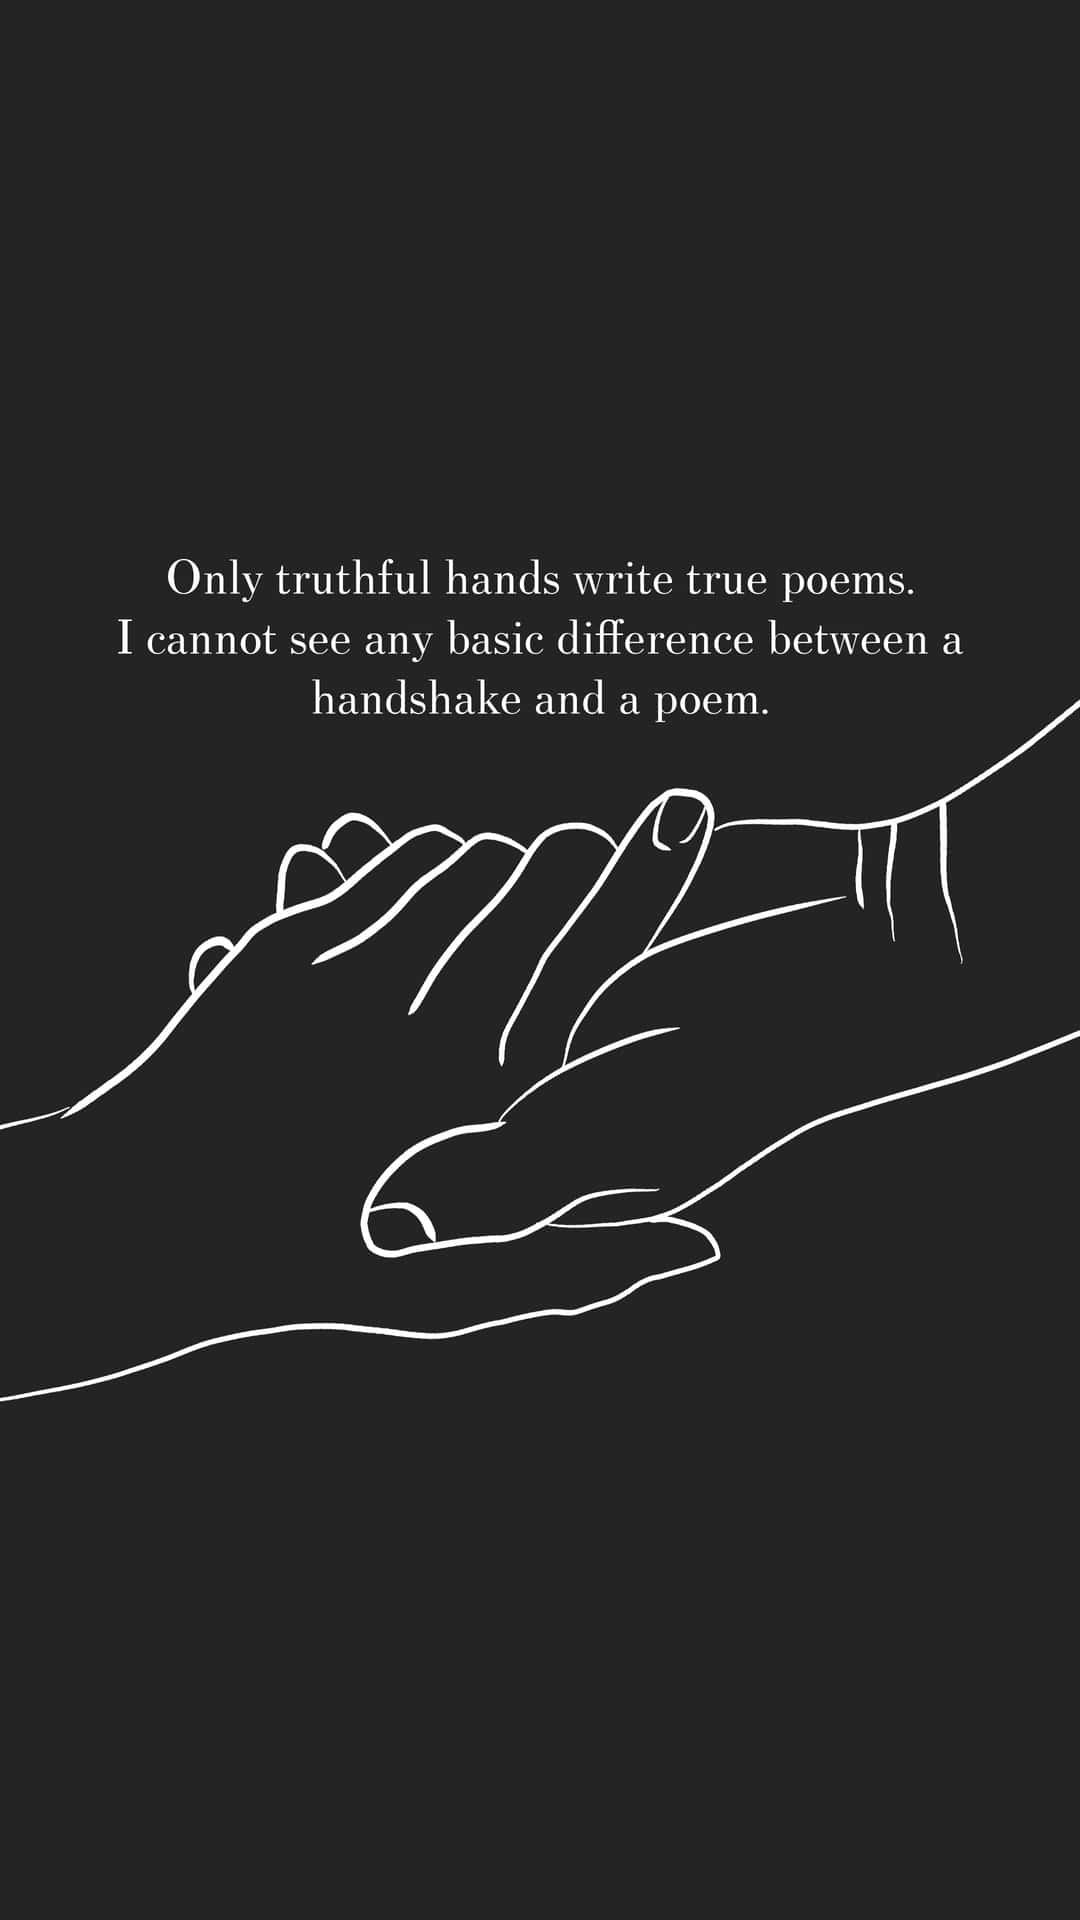 Illustration Of A Handshake With Inspirational Quote